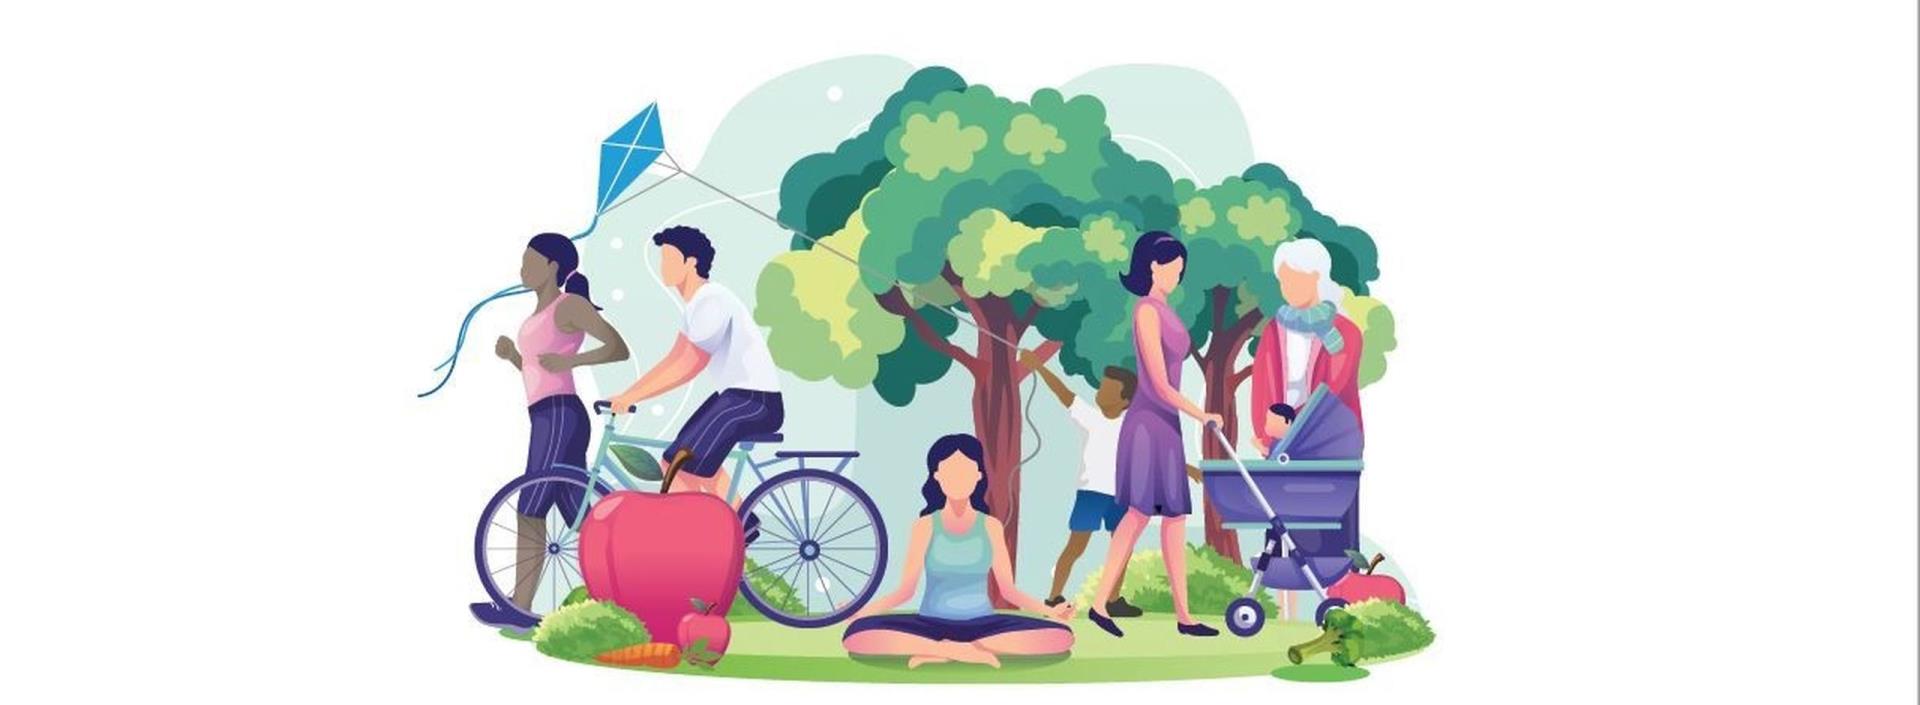 Shire of Corrigin Public Health and Wellbeing Plan 2022-2026